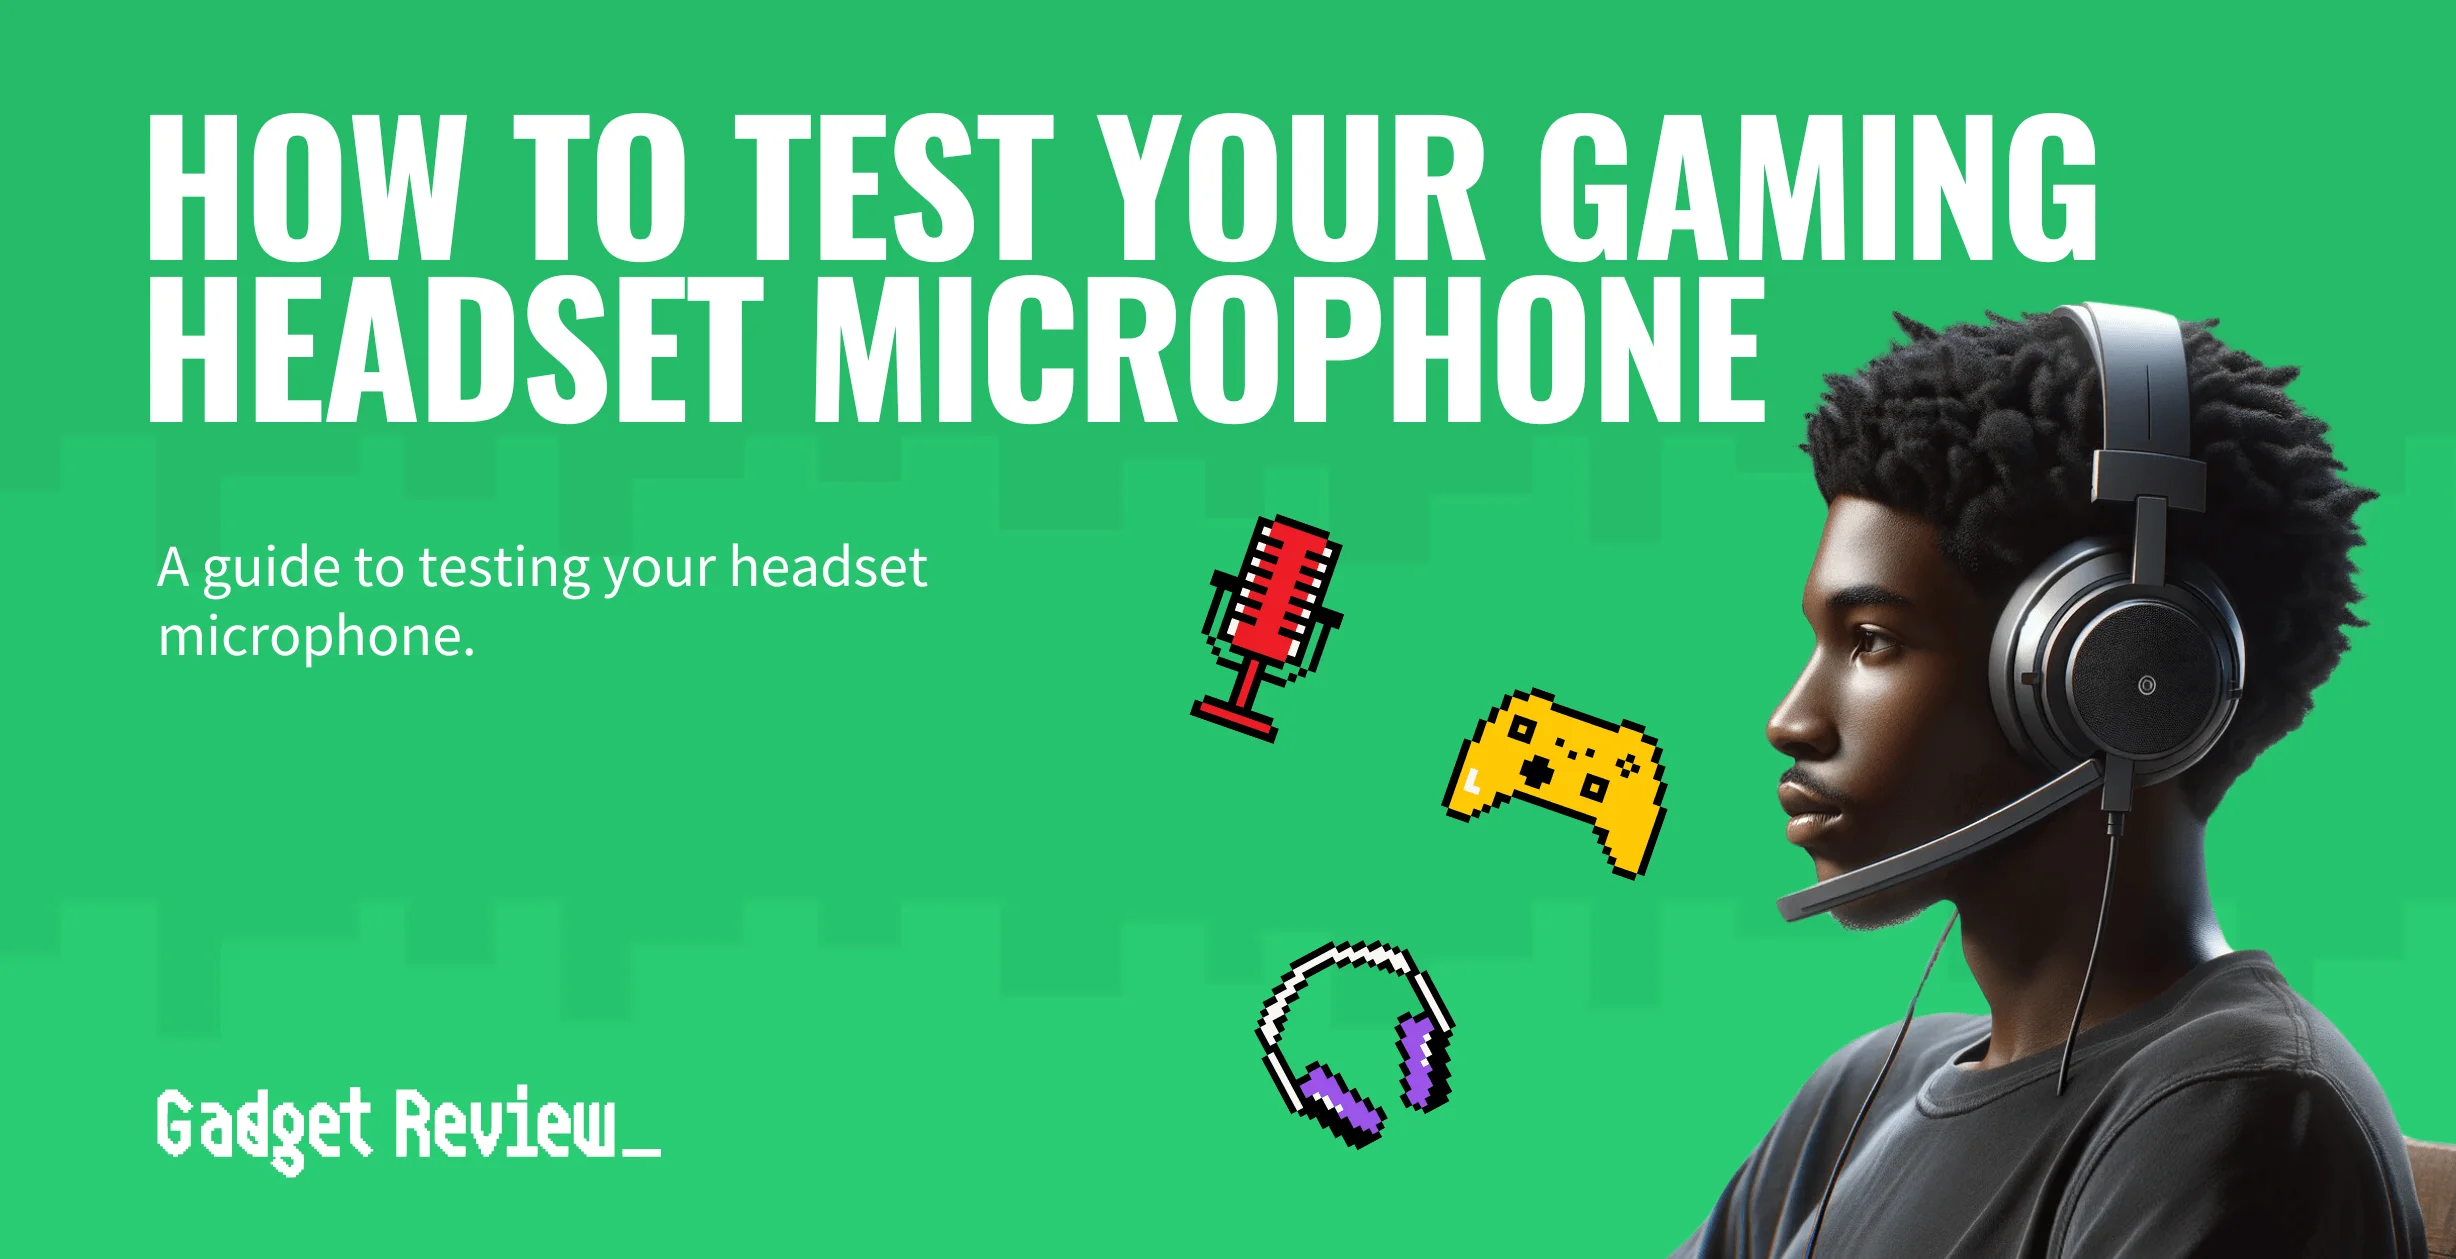 how to test your gaming headset microphone guide